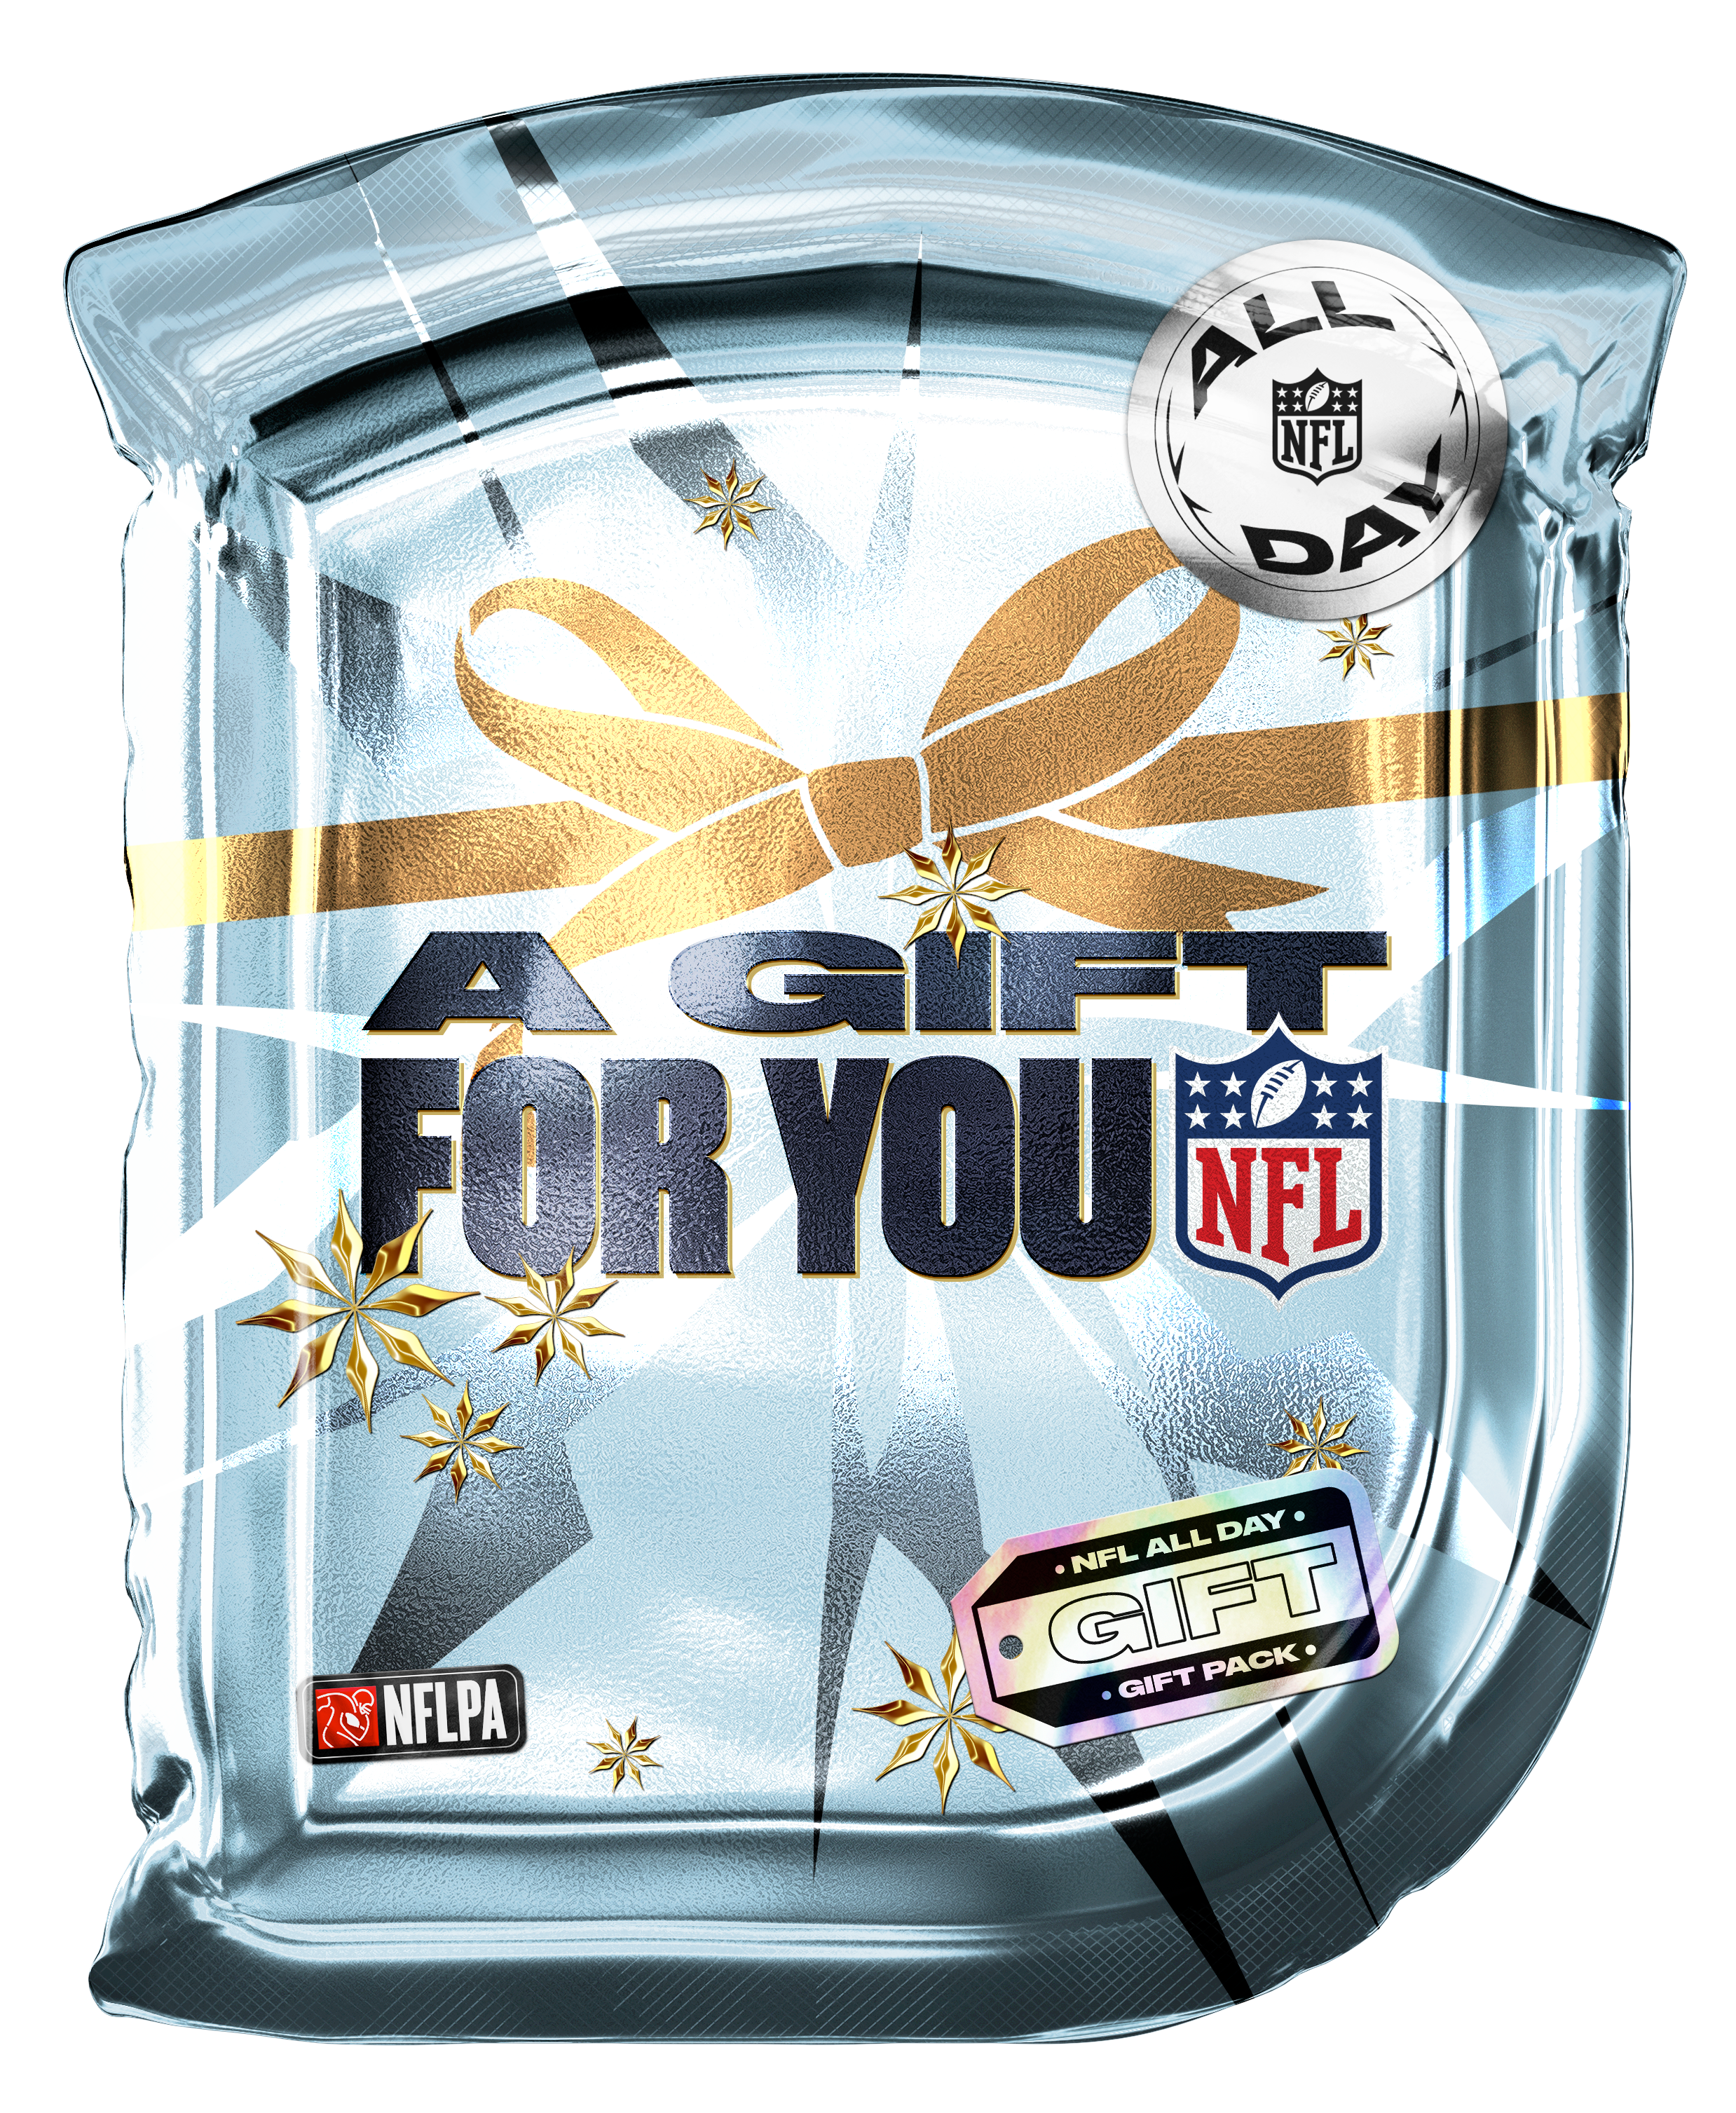 nflallday packs